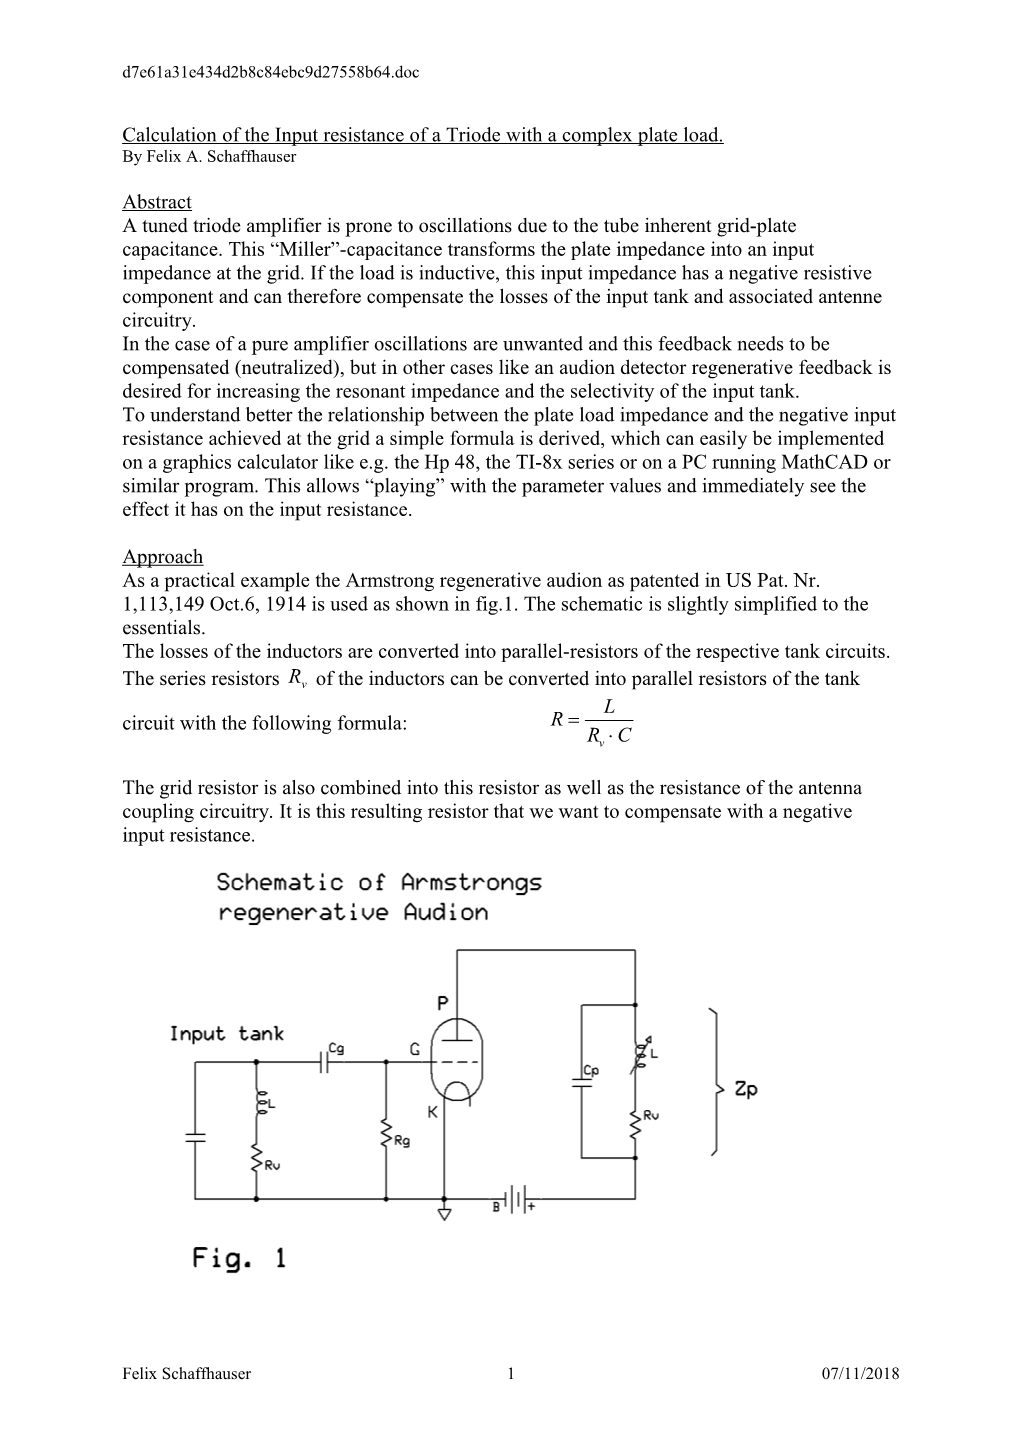 Calculation of the Input Resistance of a Triode with a Complex Plate Load